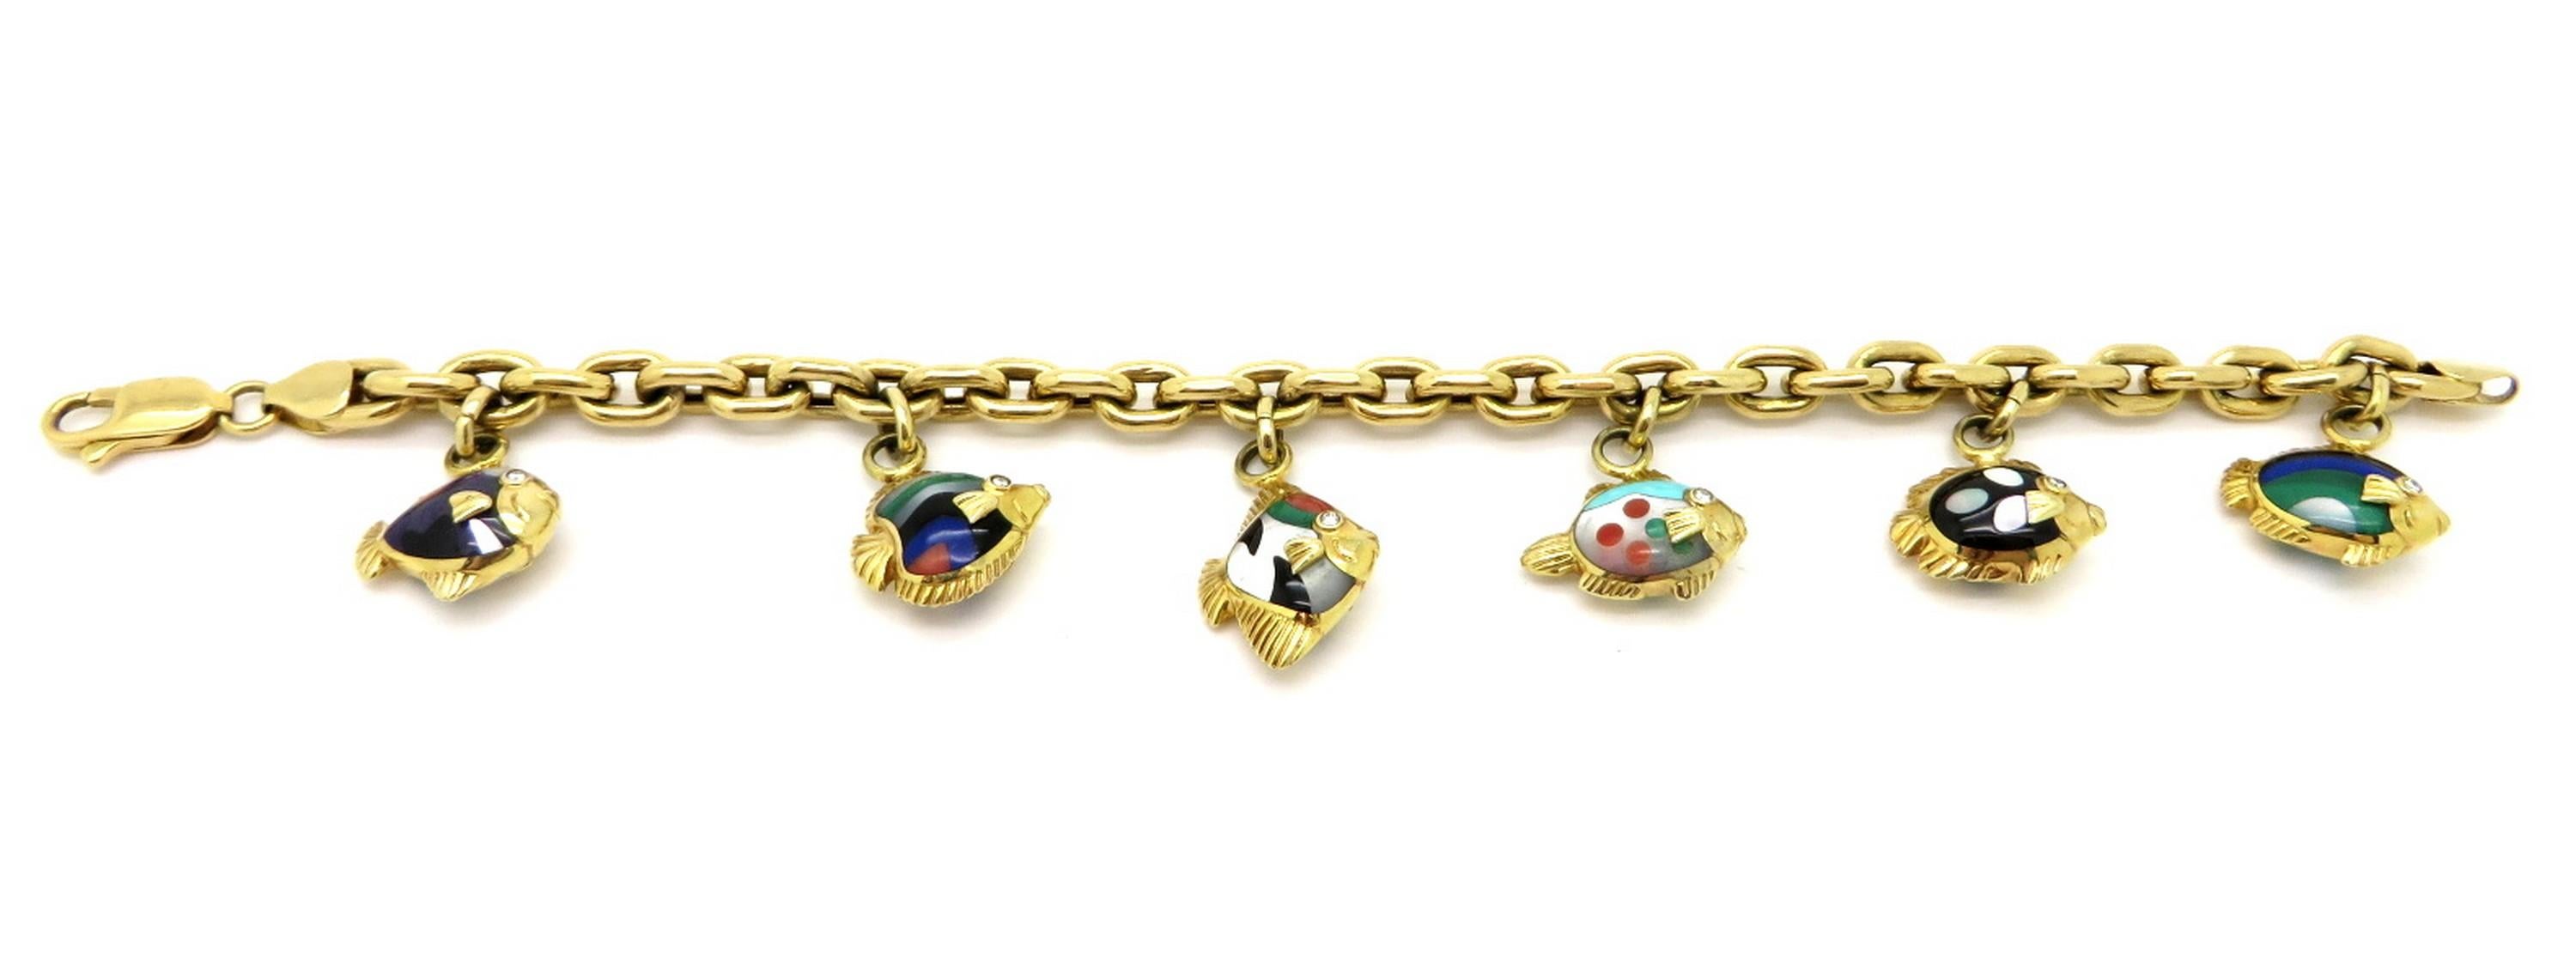 Estate 18K yellow gold designer Asch Grossbardt multi-stone and diamond inlaid fish charm bracelet. Displaying 12 gold fish charms with multi gemstone inlays. The bracelet features a rolo link design with a high polish finish. It is secured with a